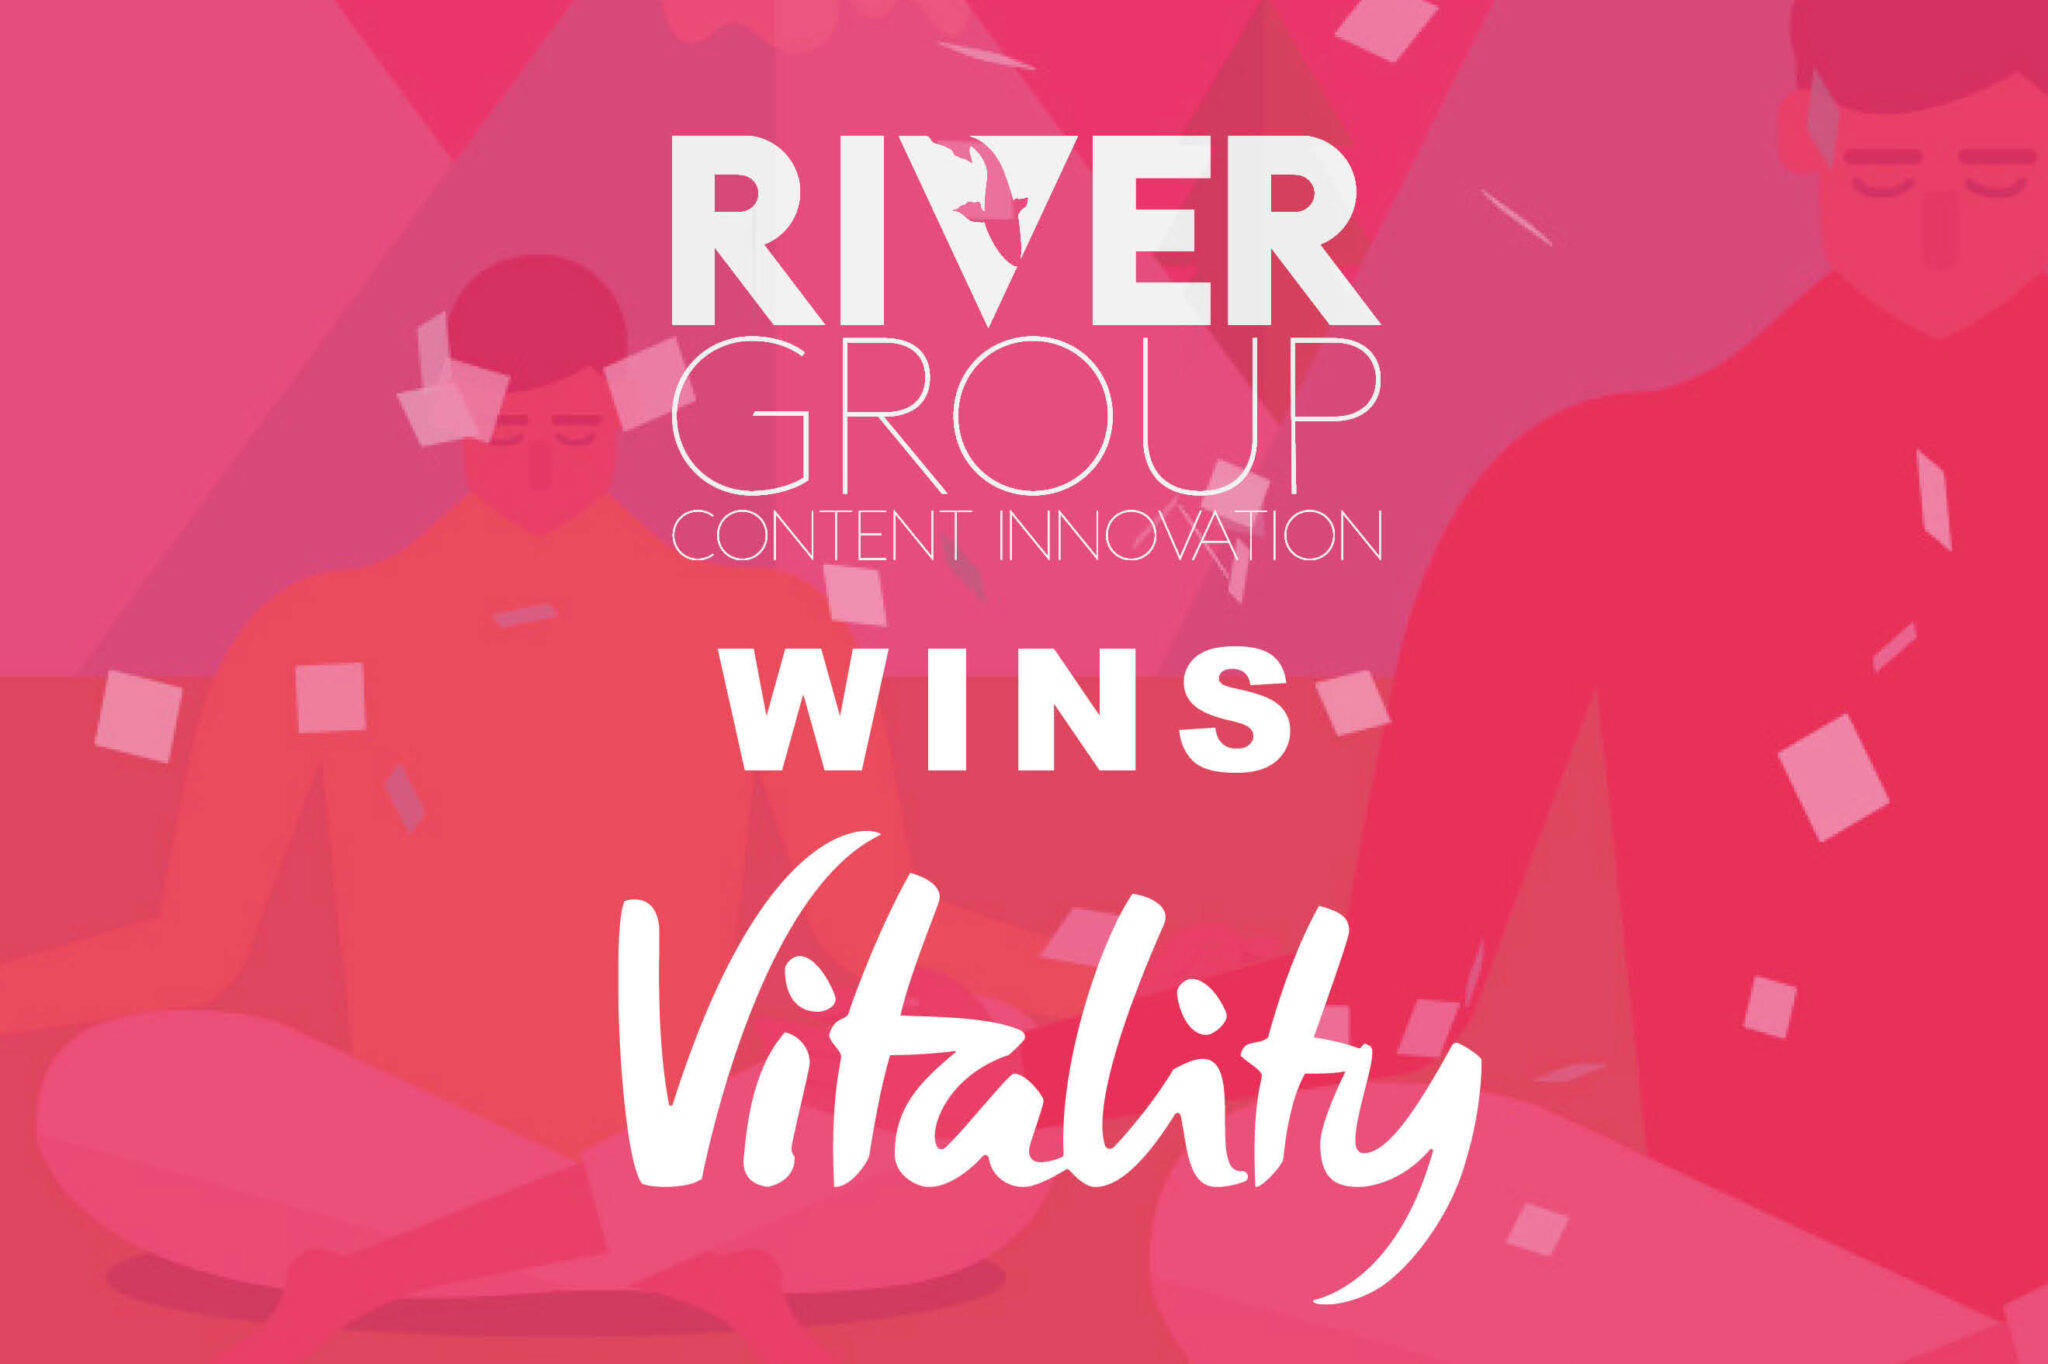 The River Group Wins Vitality Pitch! New Client River